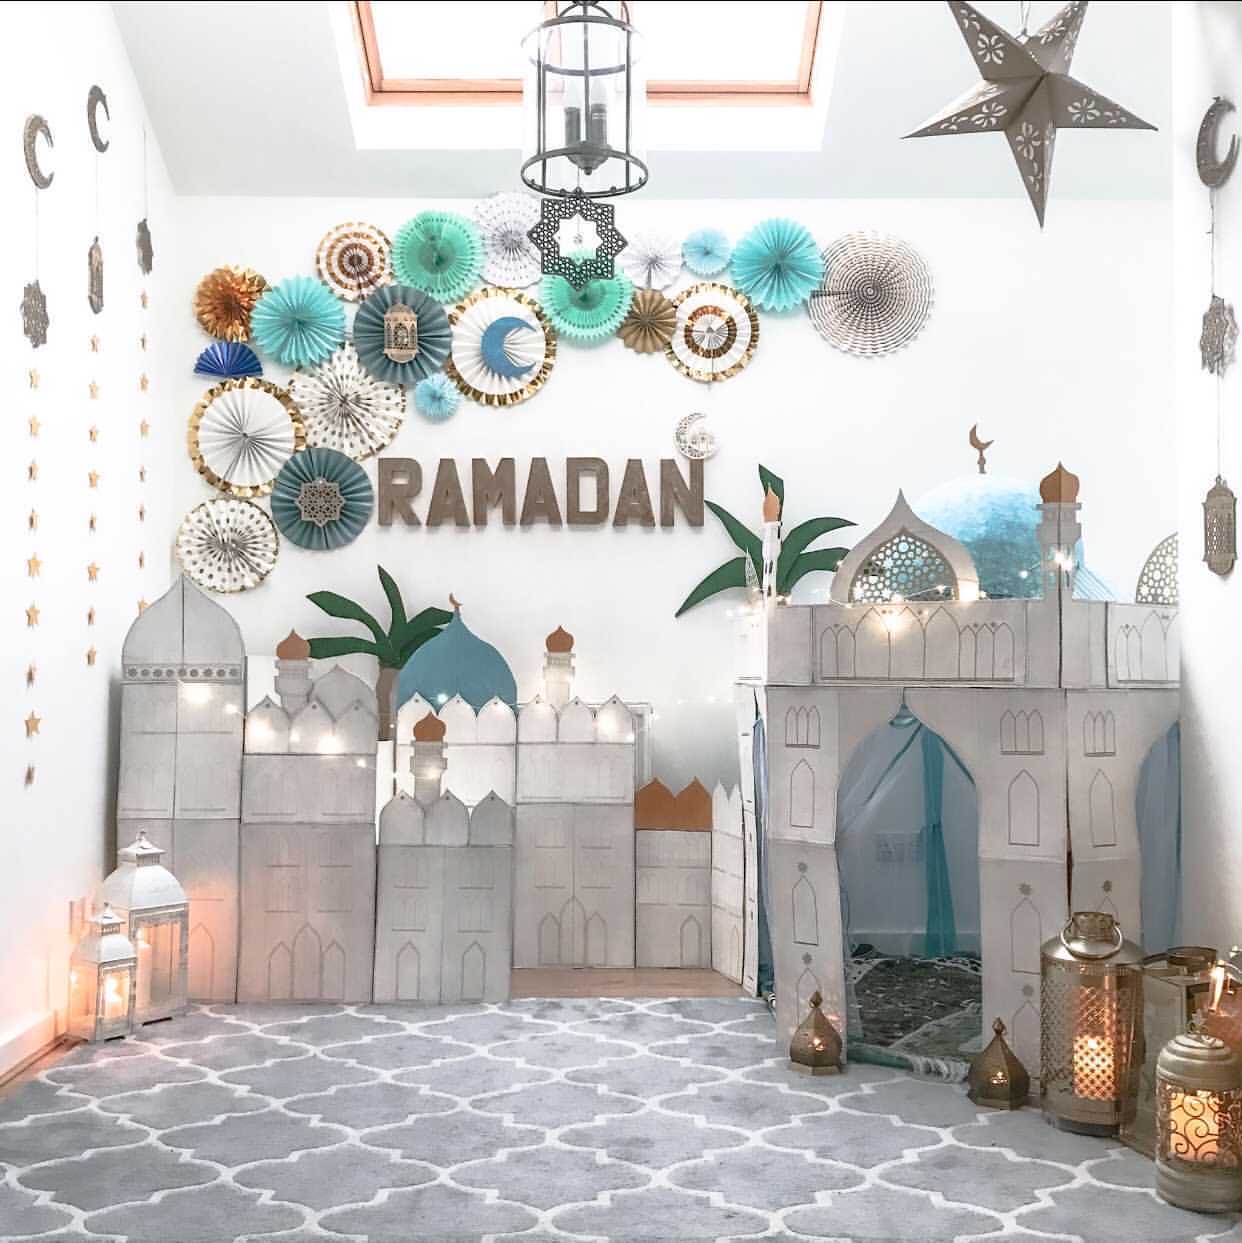 9 Eid decoration ideas to celebrate the end of Ramadan | Real Homes